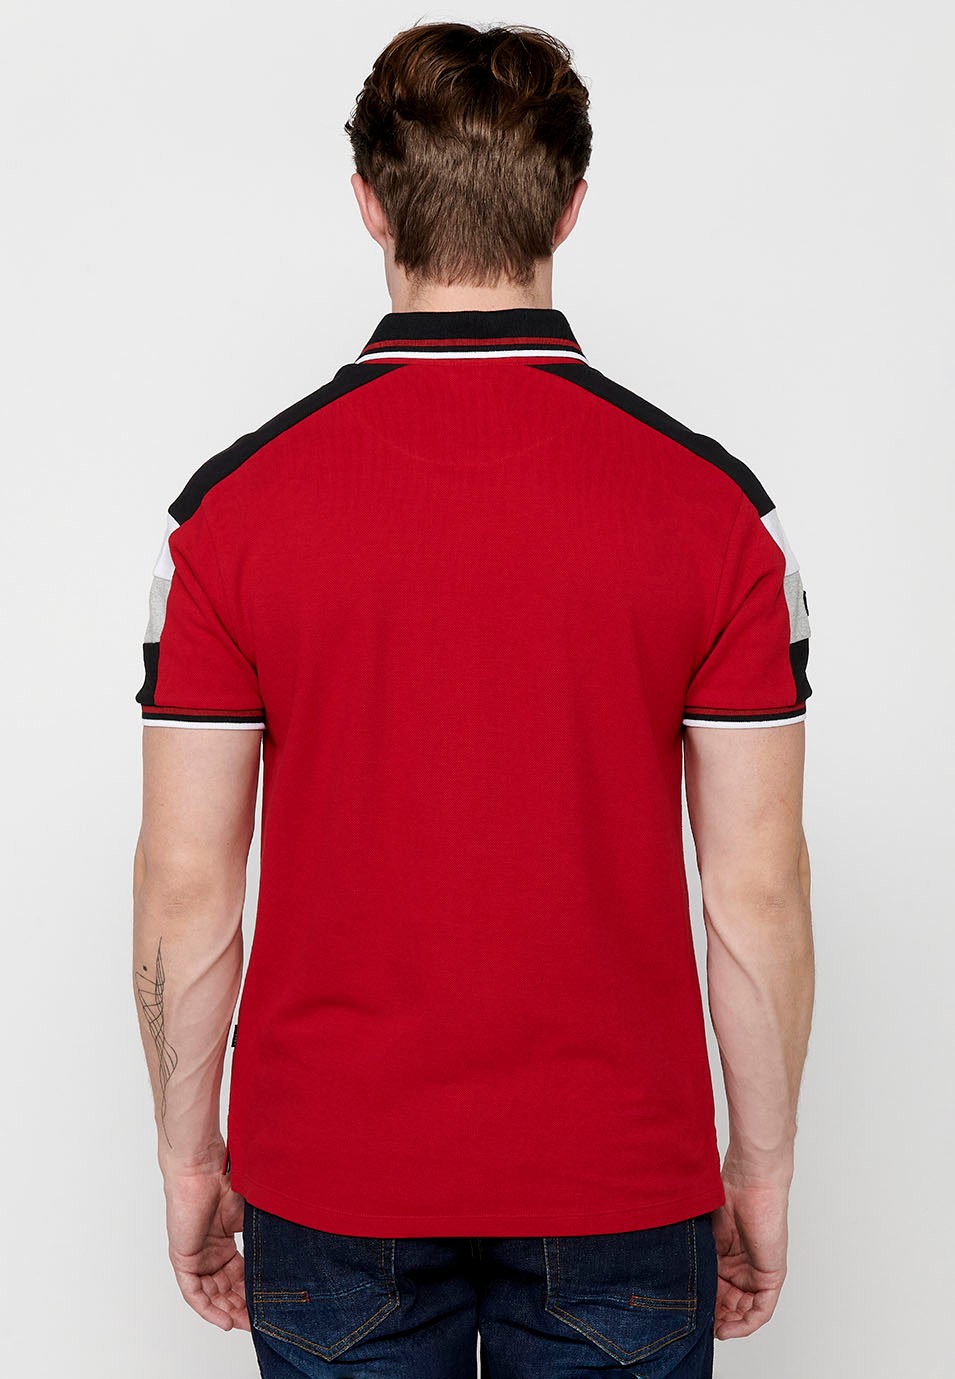 Short-sleeved cotton polo shirt with shirt collar with buttons and front detail with sleeves finished in rib and finished with side slits in Red for Men 1